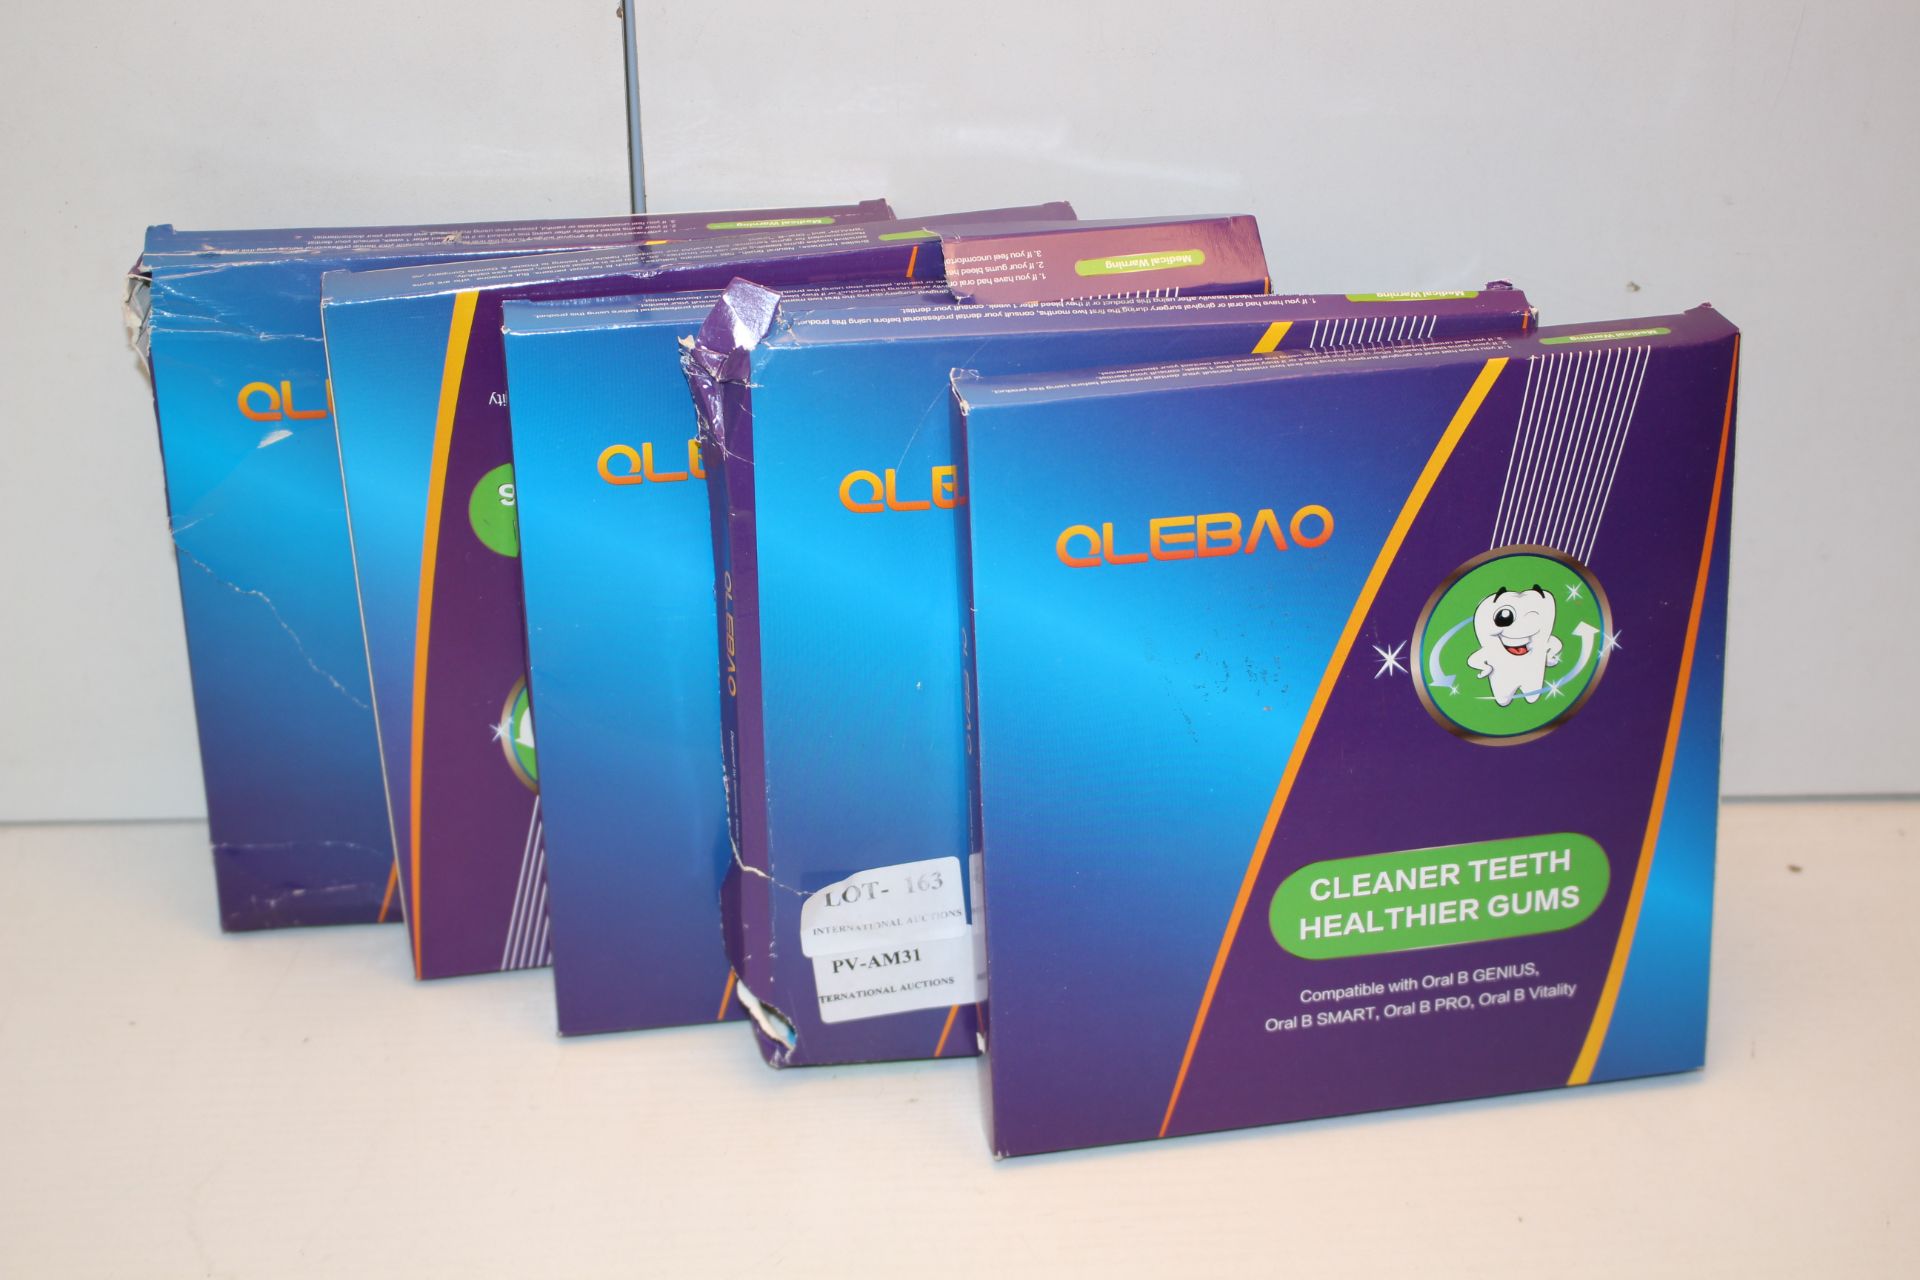 5X BOXED QLEBAO 16PIECE TOOTHBRUSH HEADS Condition ReportAppraisal Available on Request- All Items